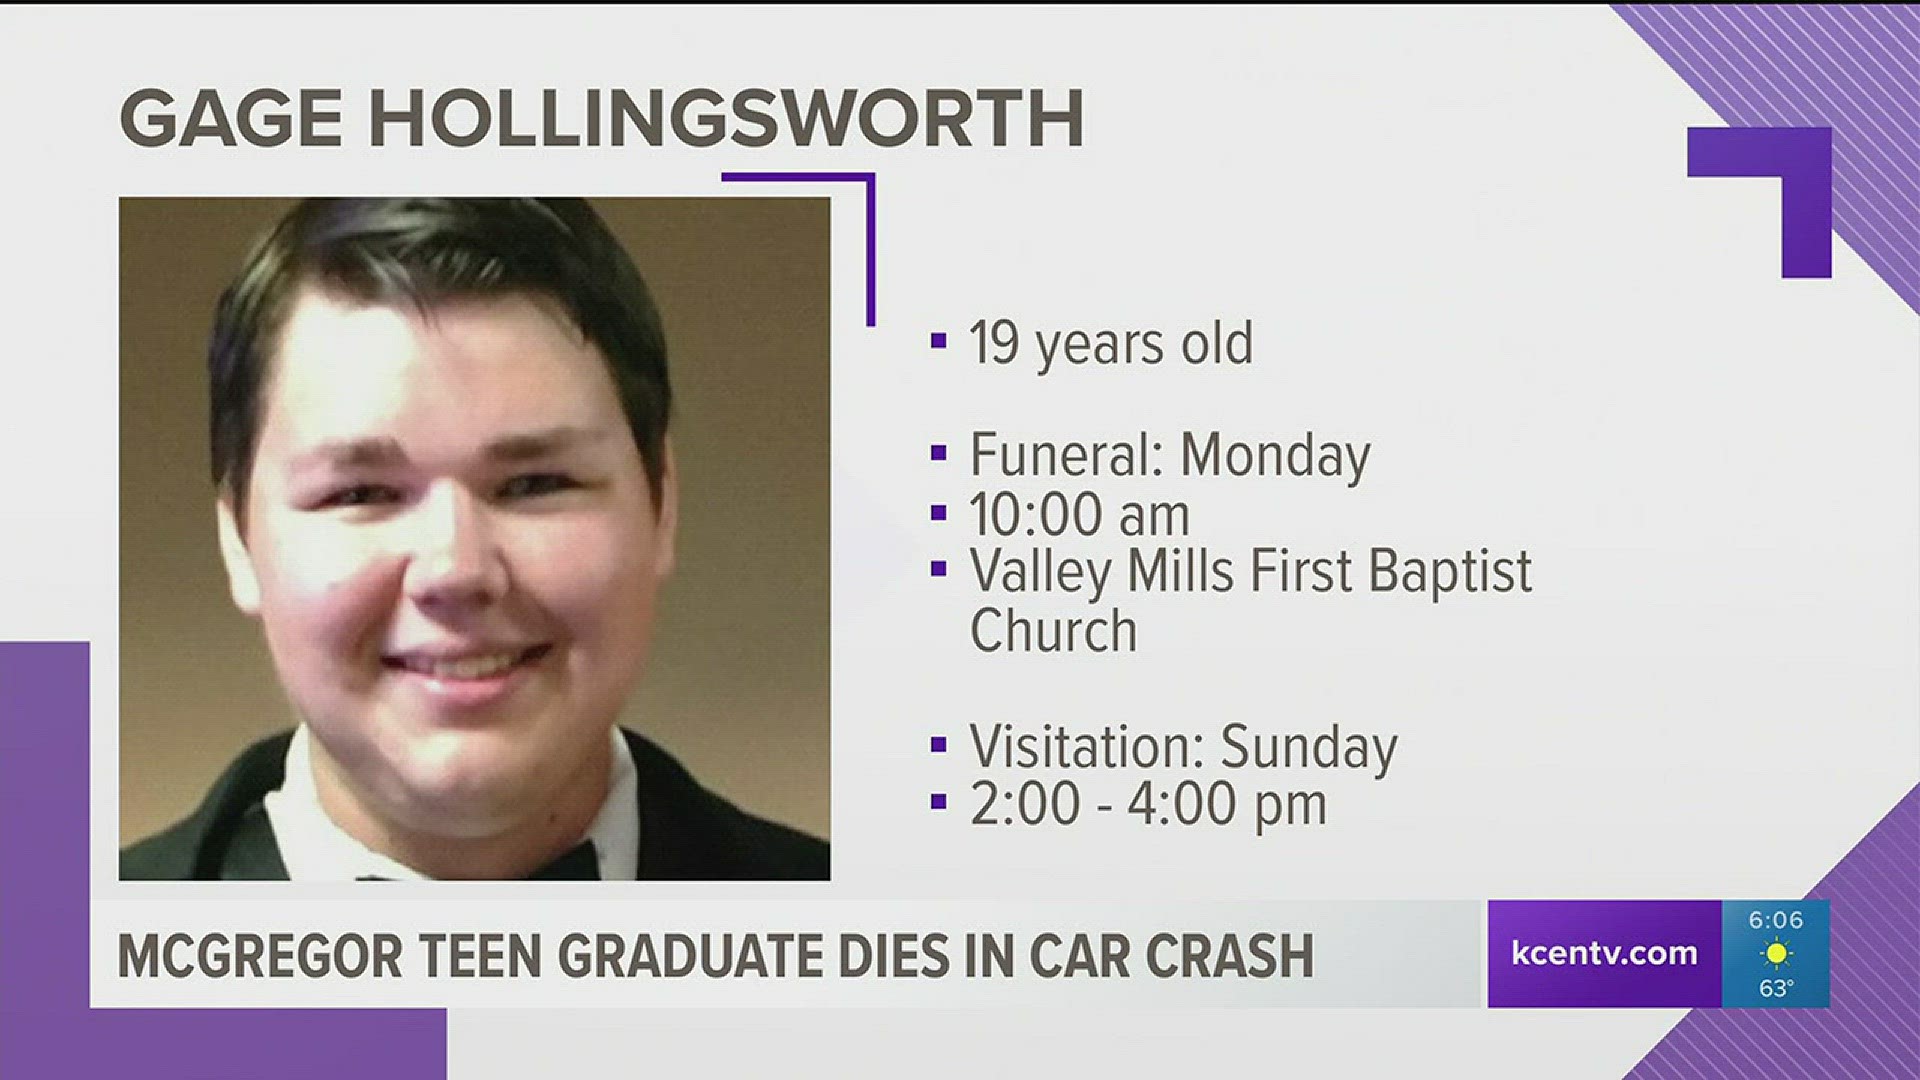 Gage Hollingsworth will be laid to rest in Valley Mills.